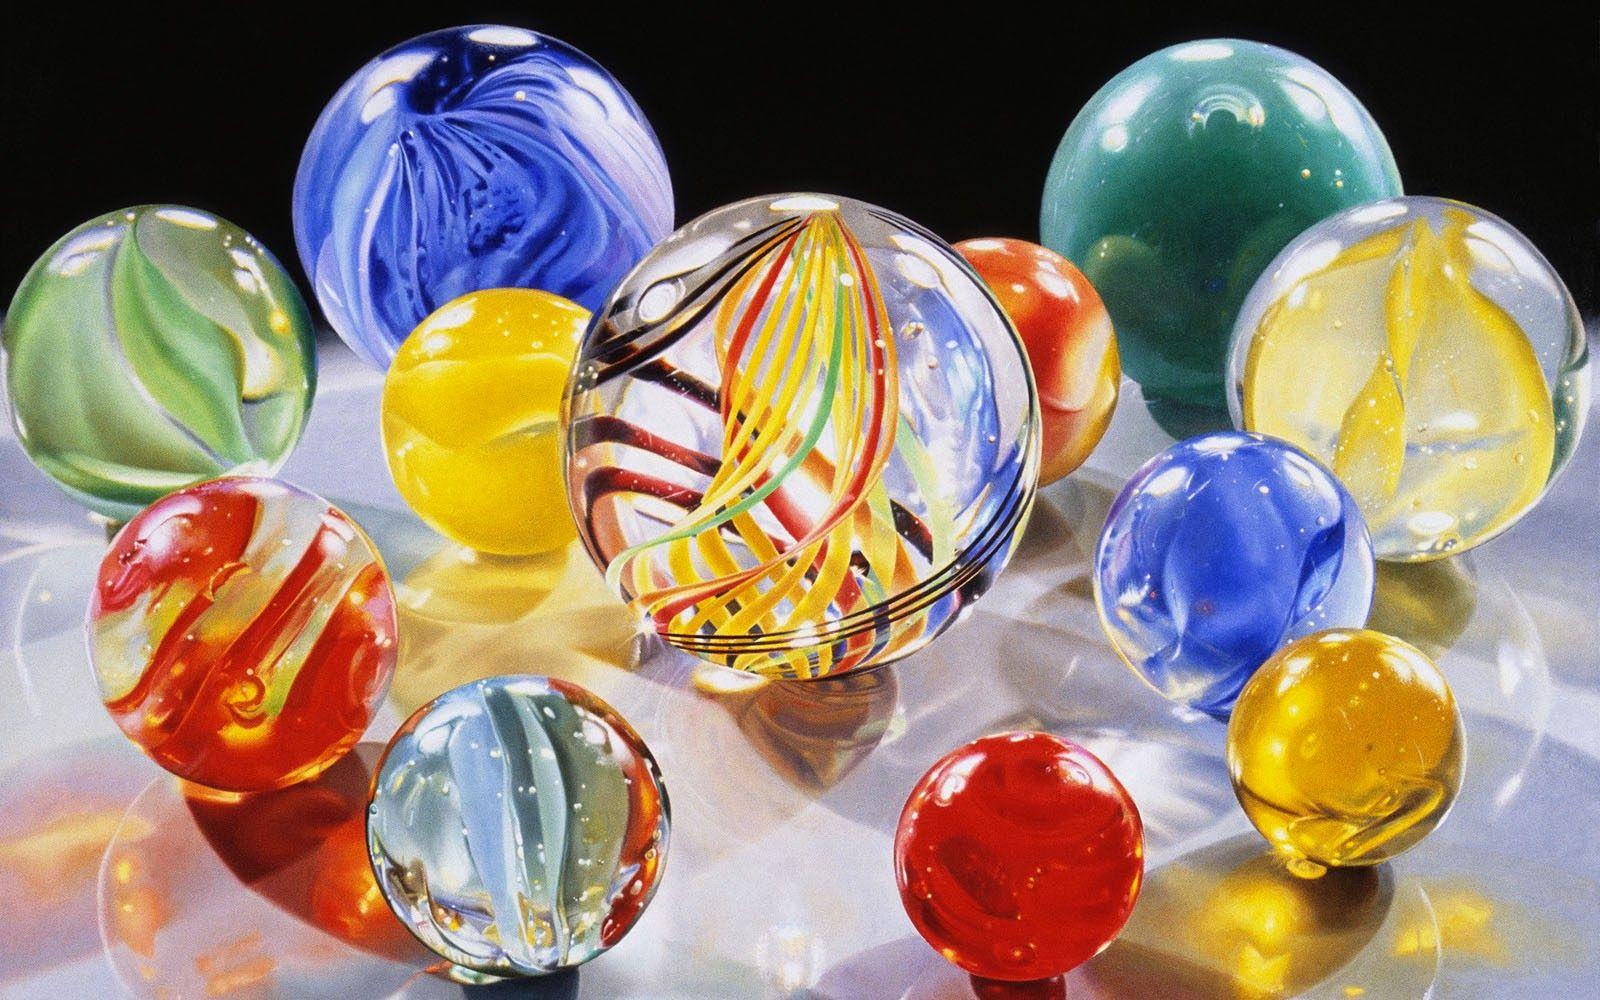 250 Glass Bead Wallpaper Stock Photos HighRes Pictures and Images   Getty Images